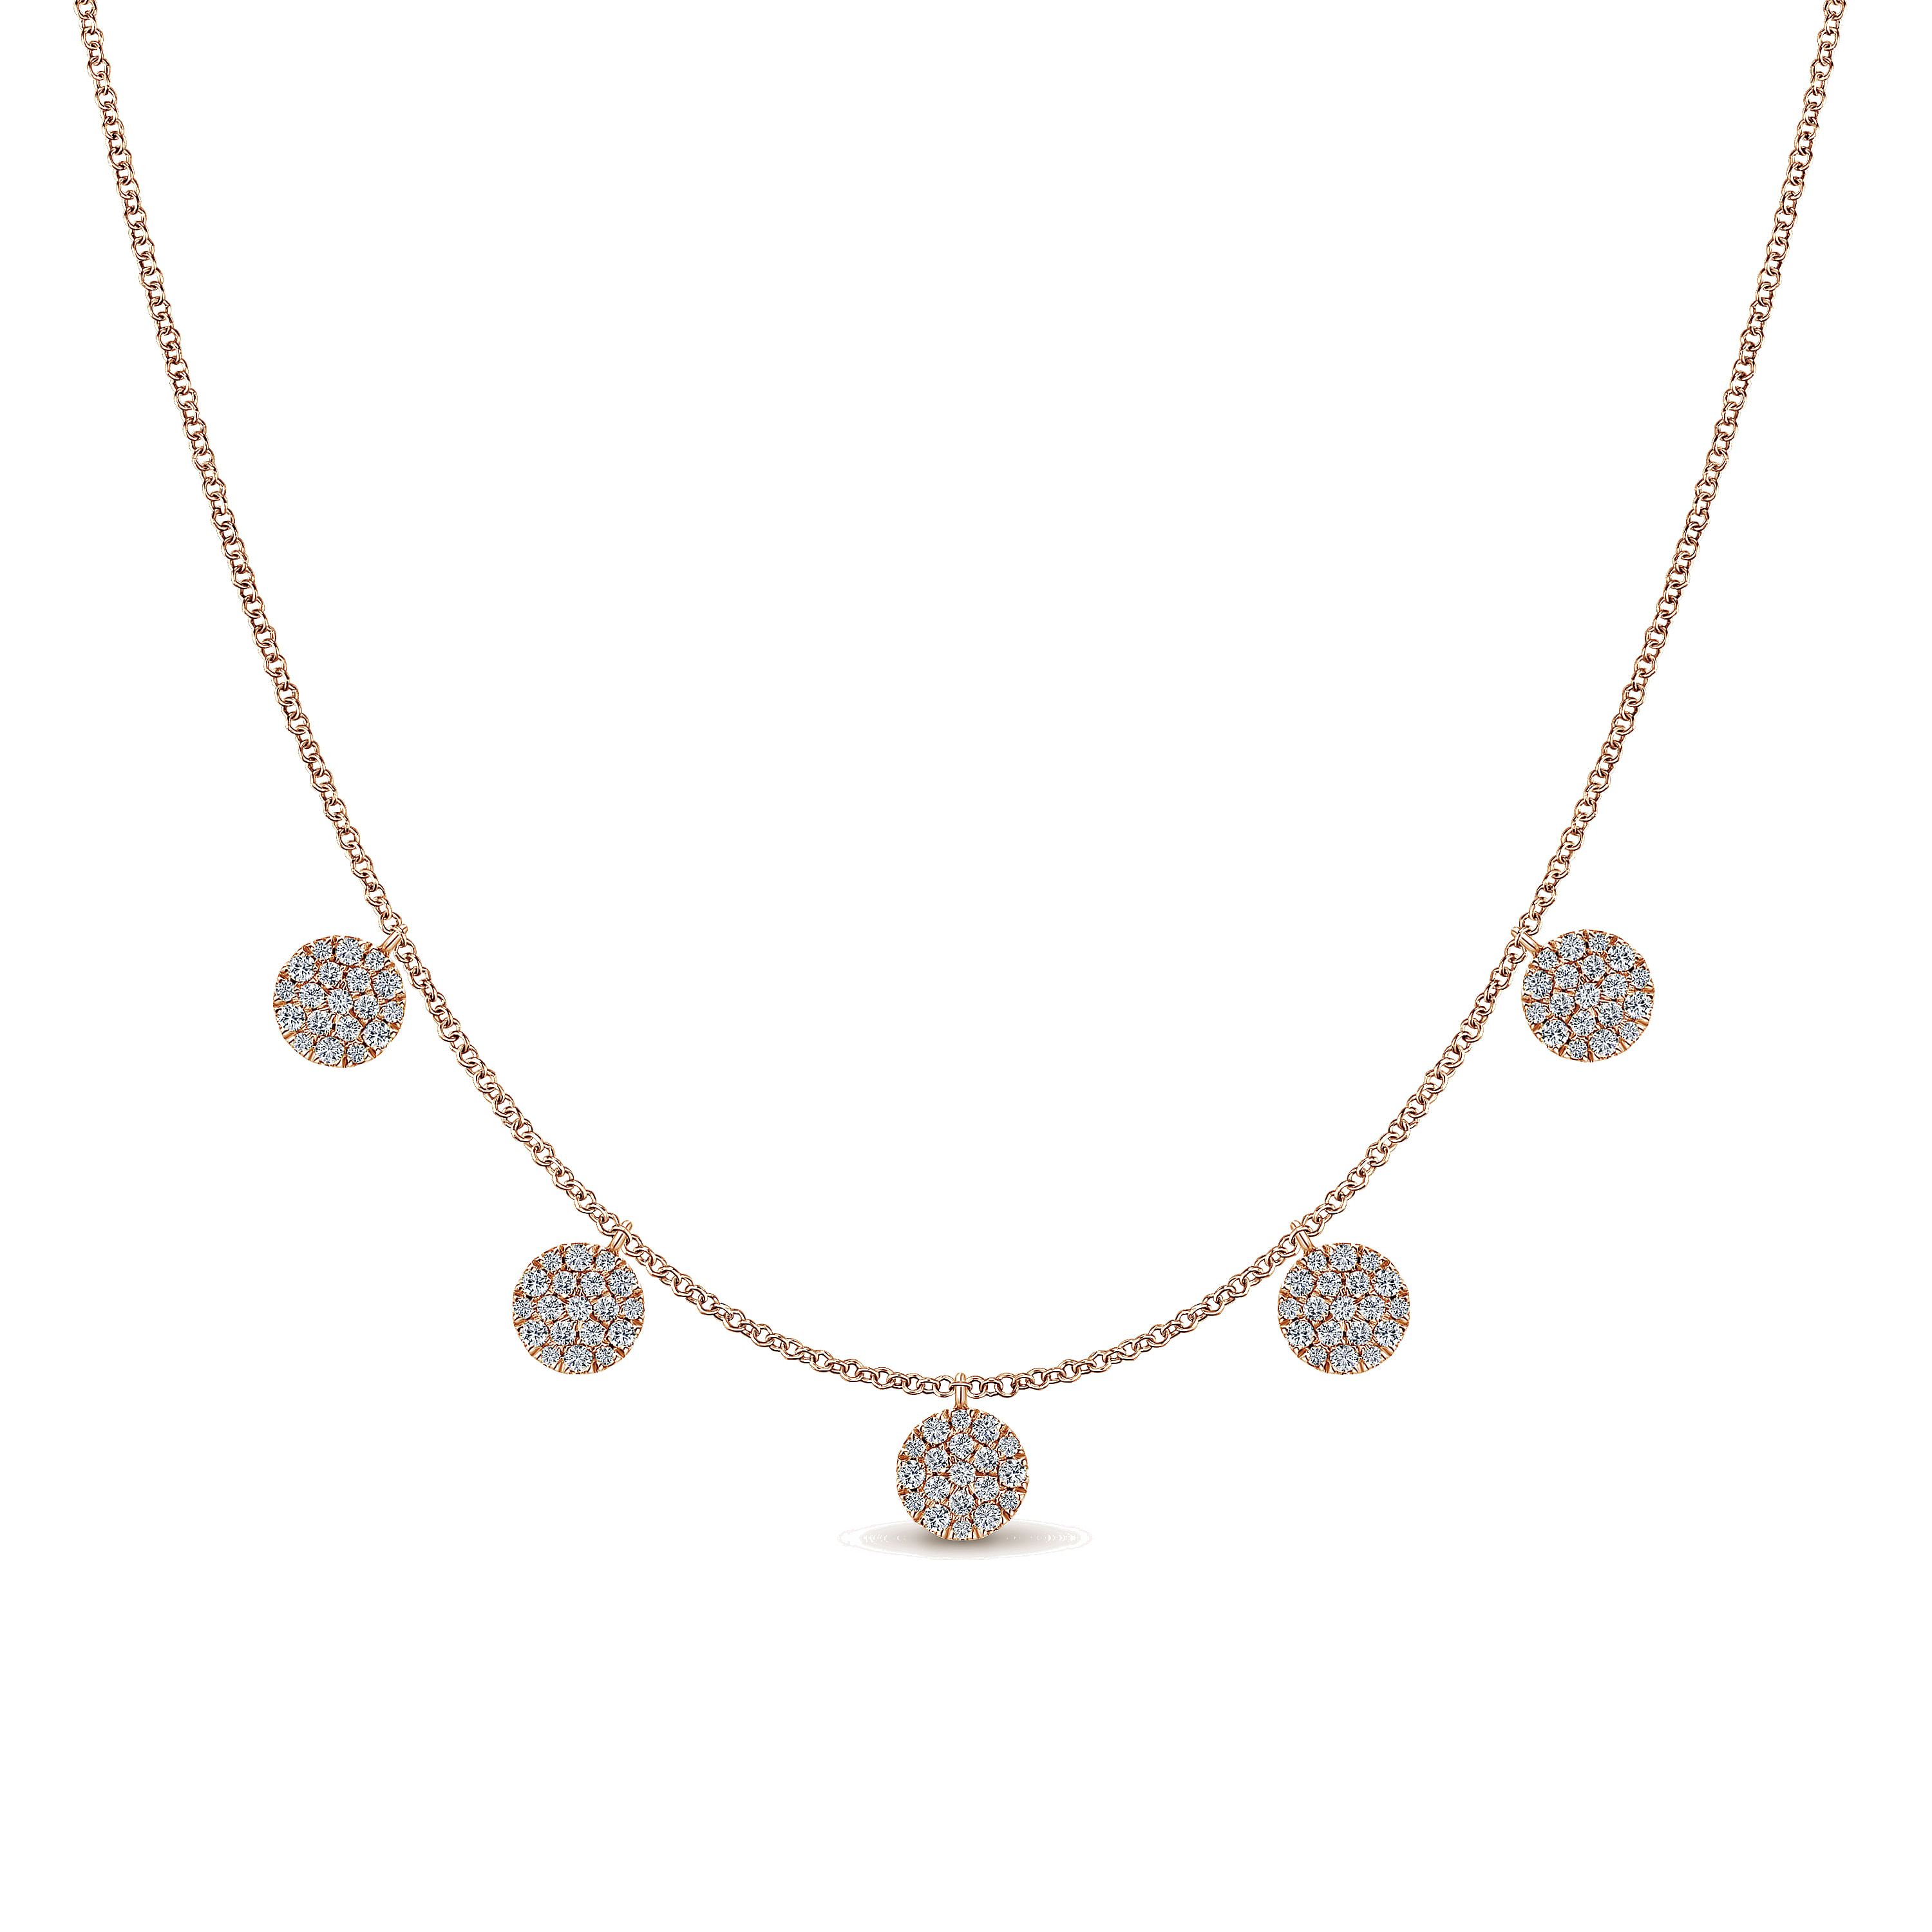 14K Rose Gold Necklace with Round Diamond Pavé Disc Drops